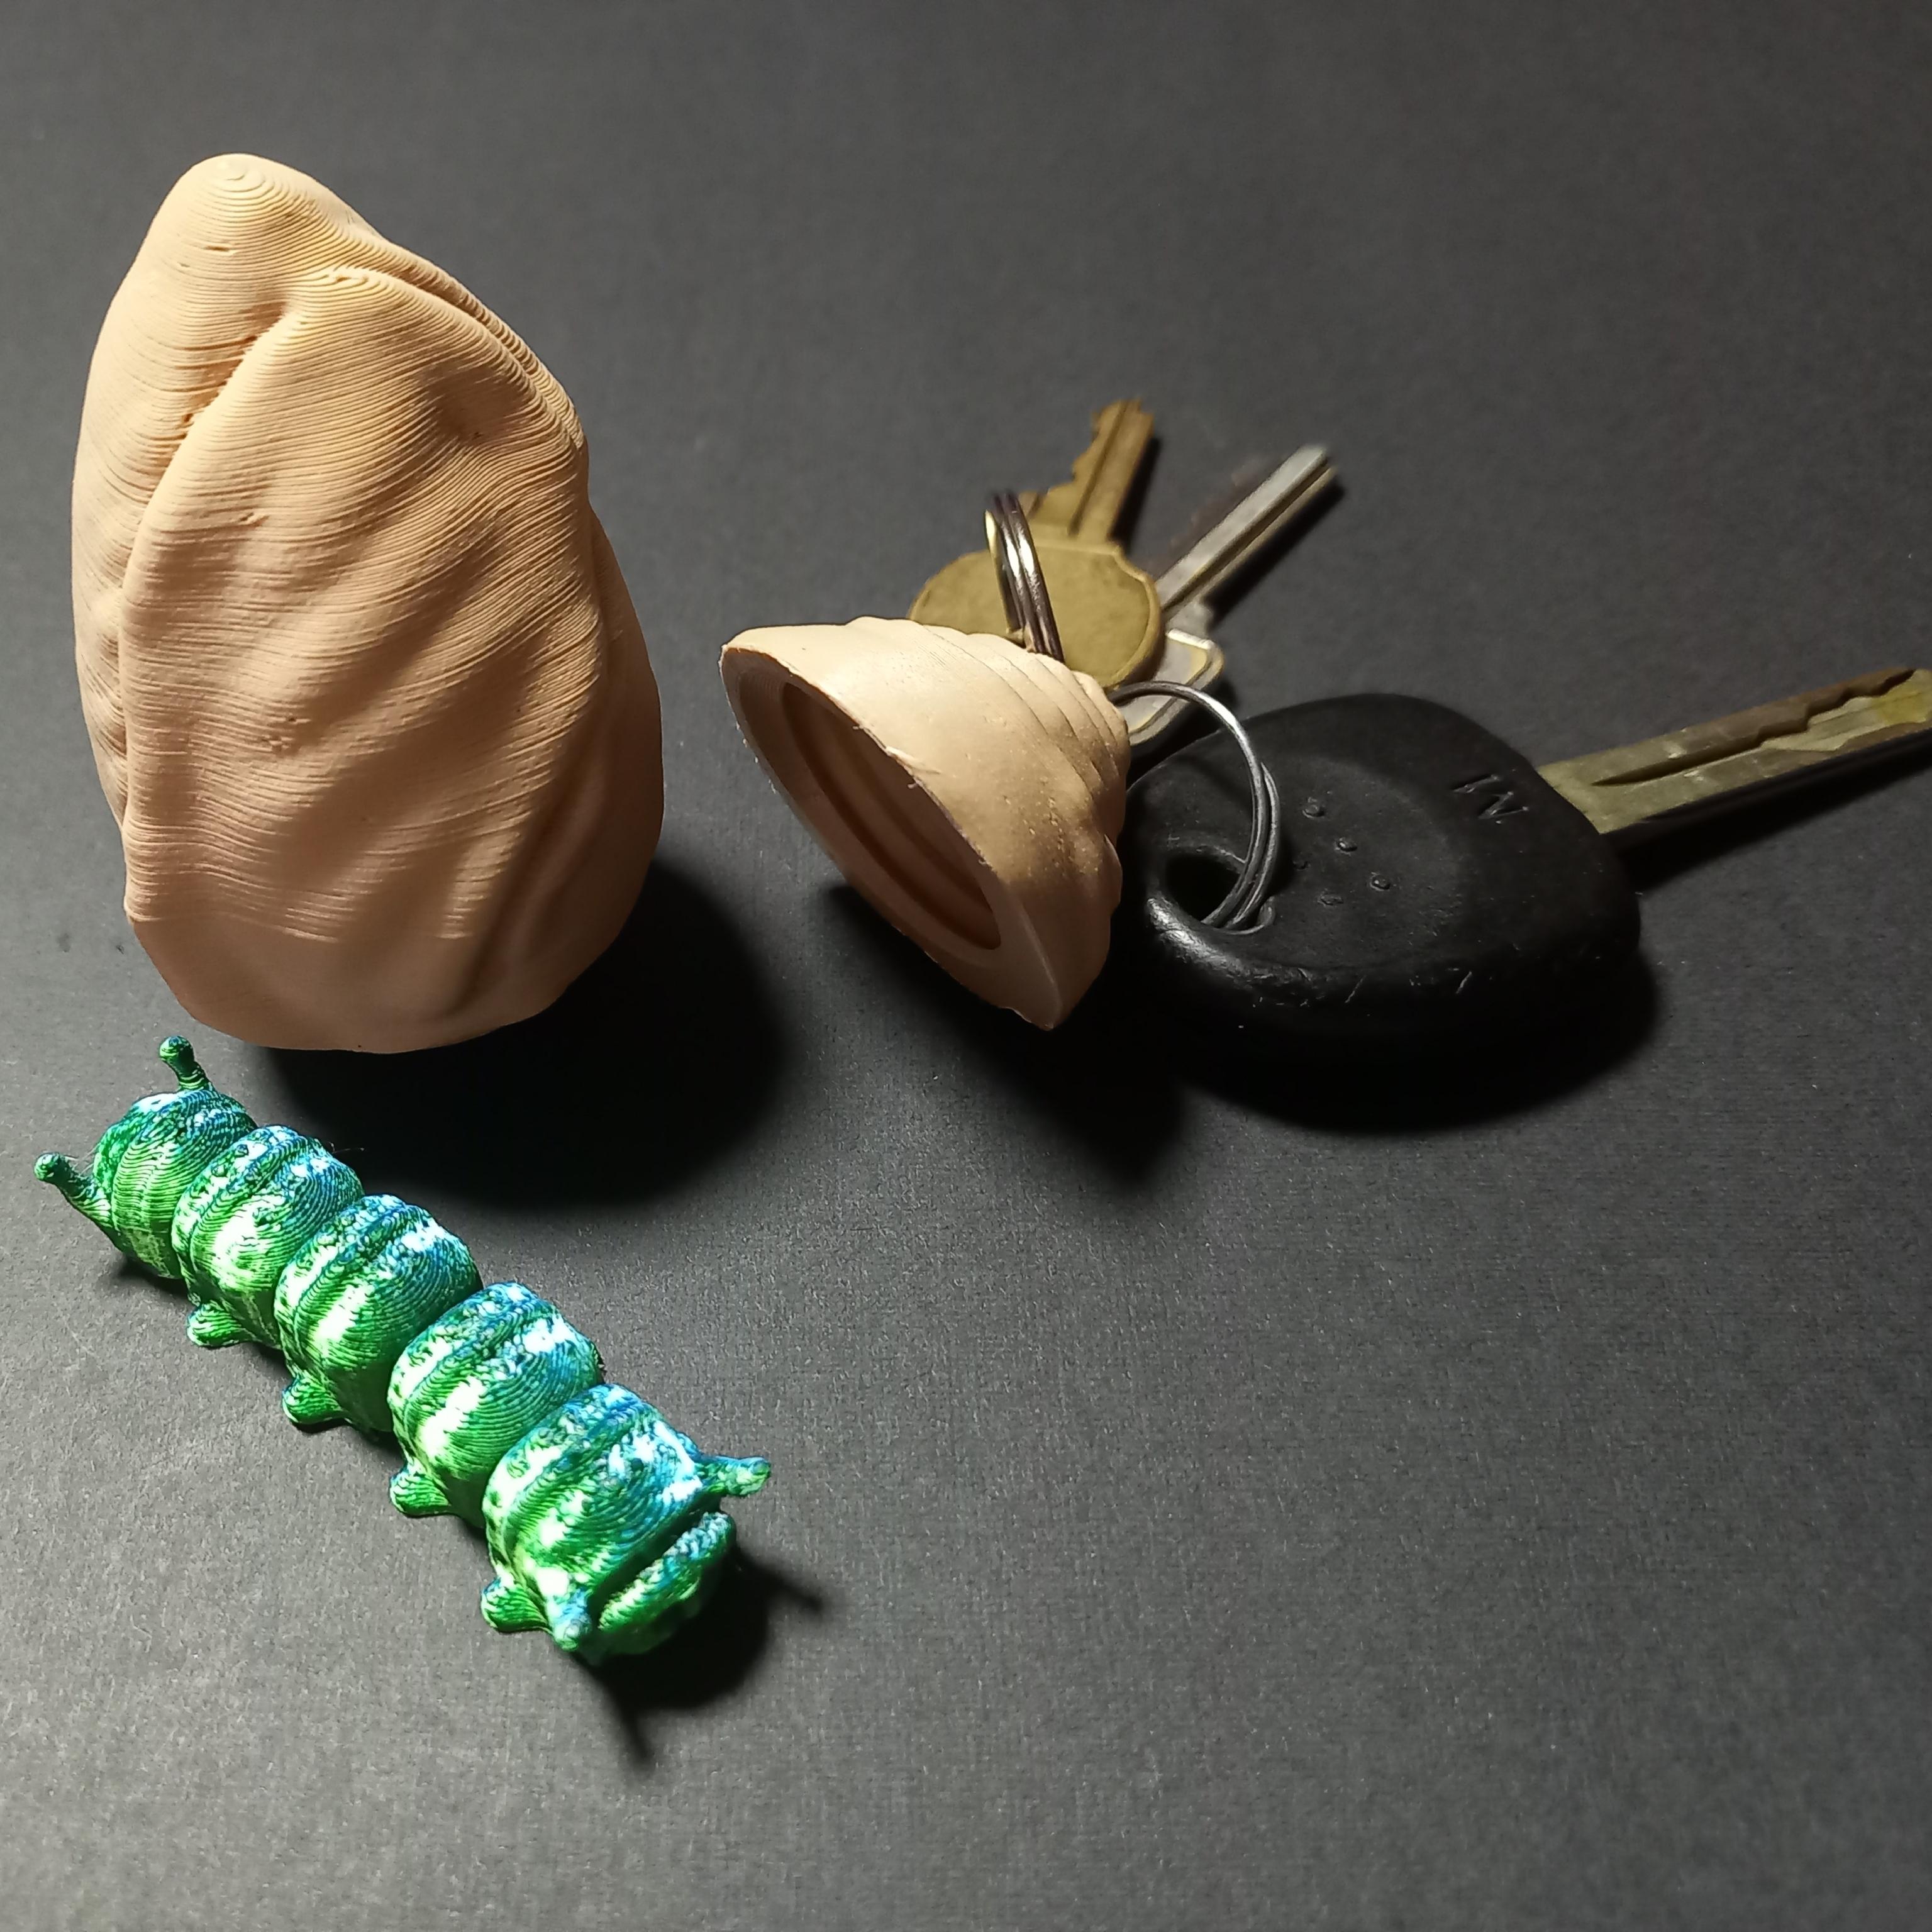 FLEXI CATERPILLAR IN COCOON CONTAINER KEYCHAIN - PRINT IN PLACE - SUPPORT FREE 3d model